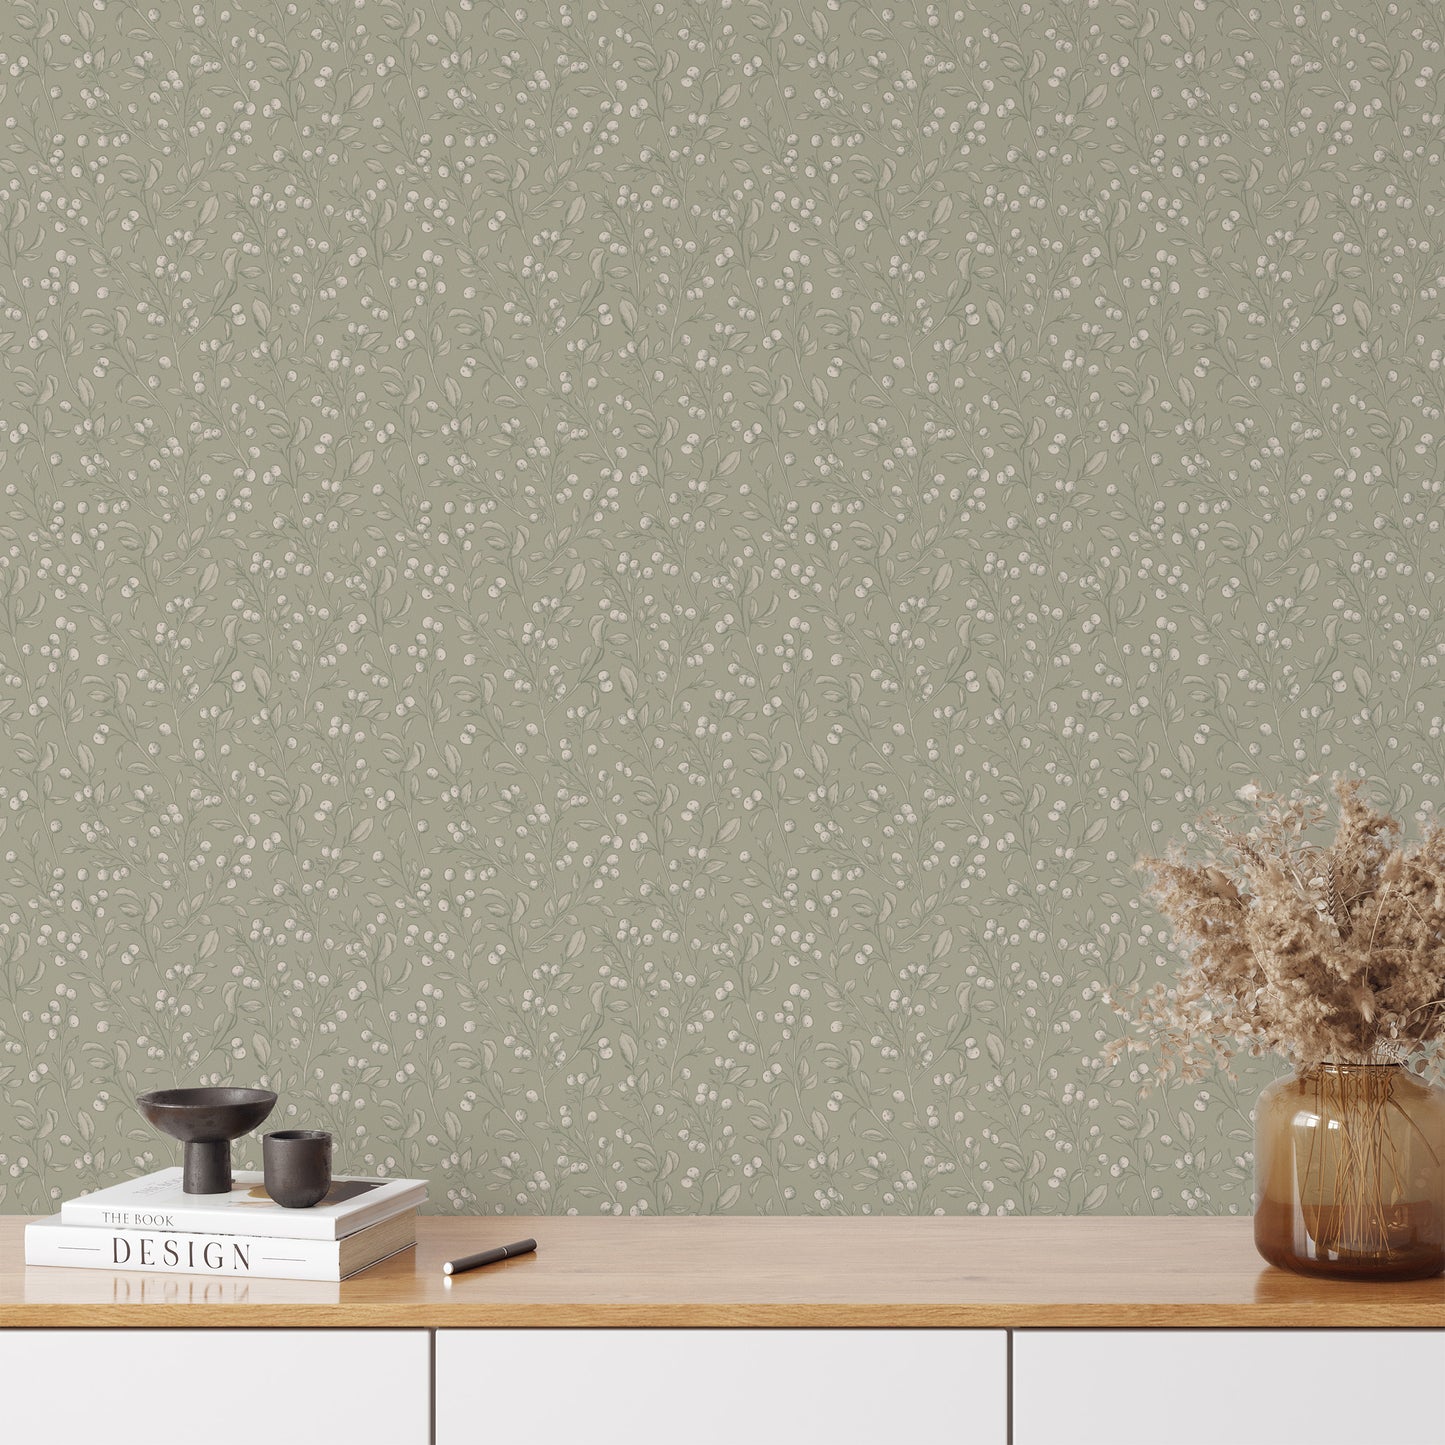 Mockup of our Berries Wallpaper in Dry Sage is a peel and stick, removable wallpaper with hand-drawn sketched berries in dry sage and white by artist Mariah Cottrell.